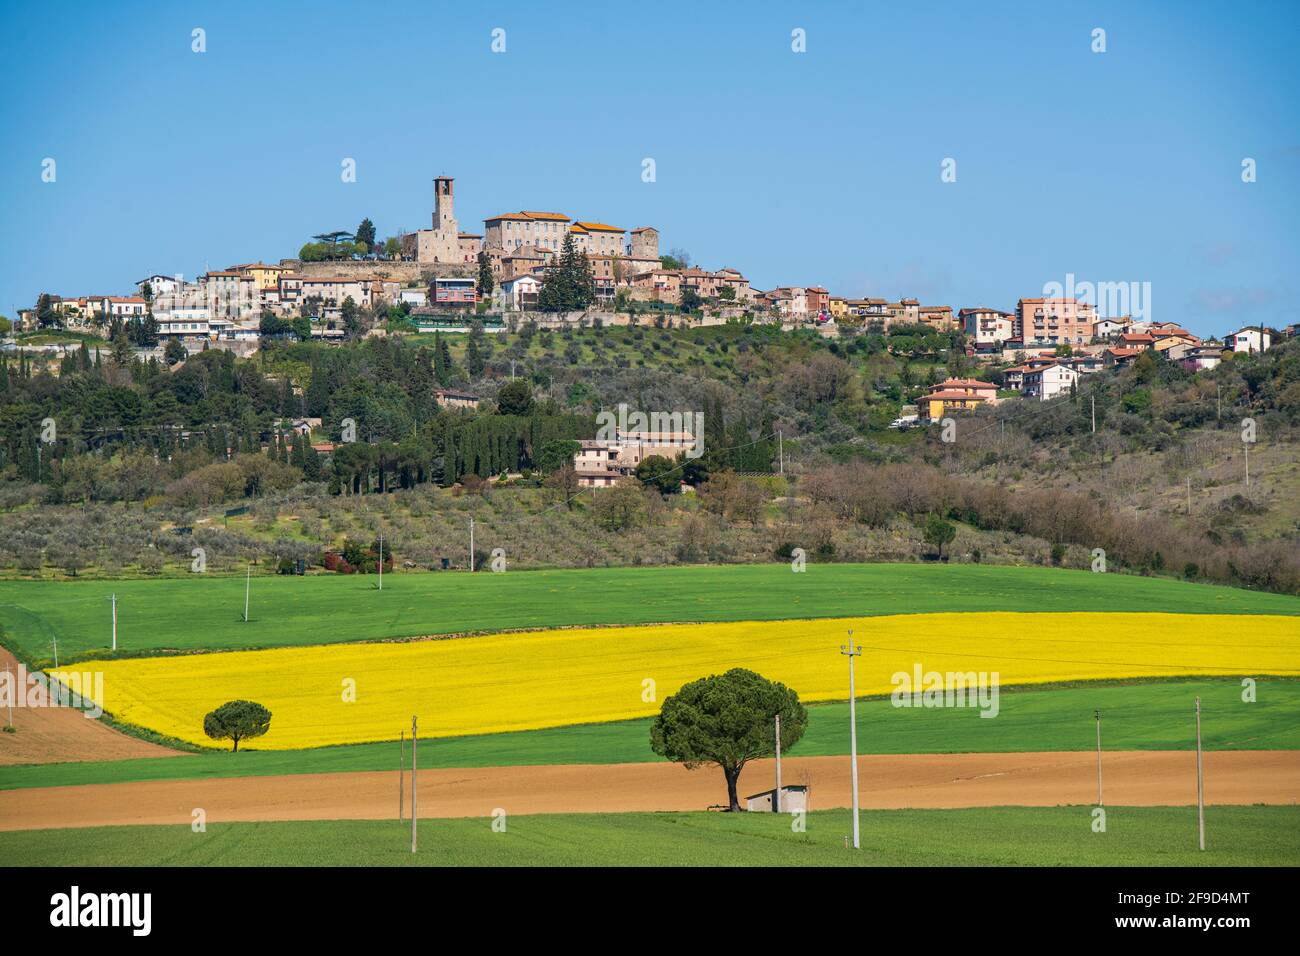 Rapeseed field in Agello, Perugia, Umbria, green heart of Italy. Agello is a small hilltop village near Perugia in the Umbrian countryside Stock Photo